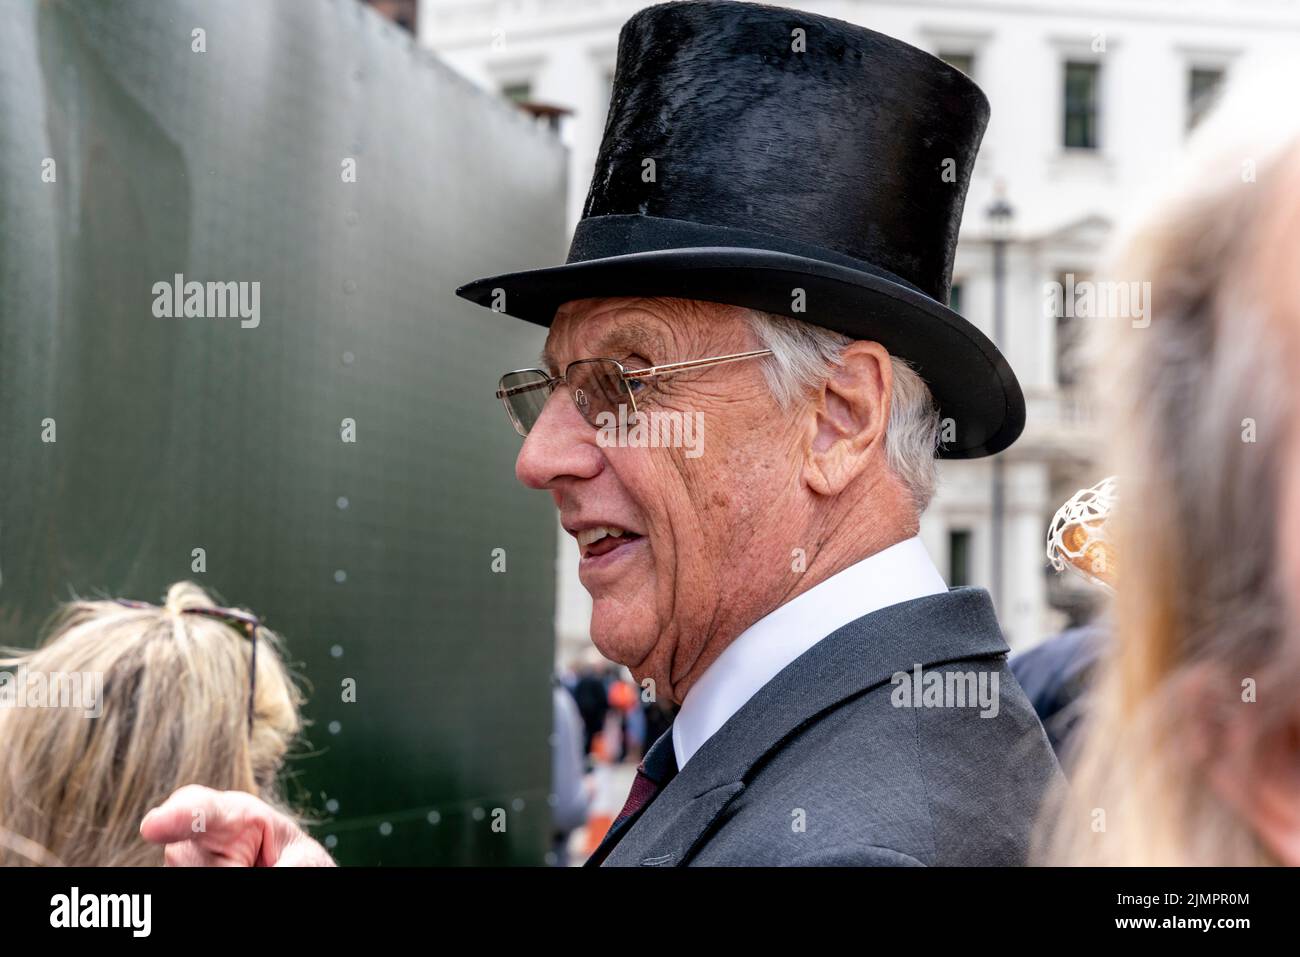 A Gentleman In A Top Hat and Tails Attends The Queen's Platinum Jubilee Celebrations, Buckingham Palace Area, London, UK. Stock Photo